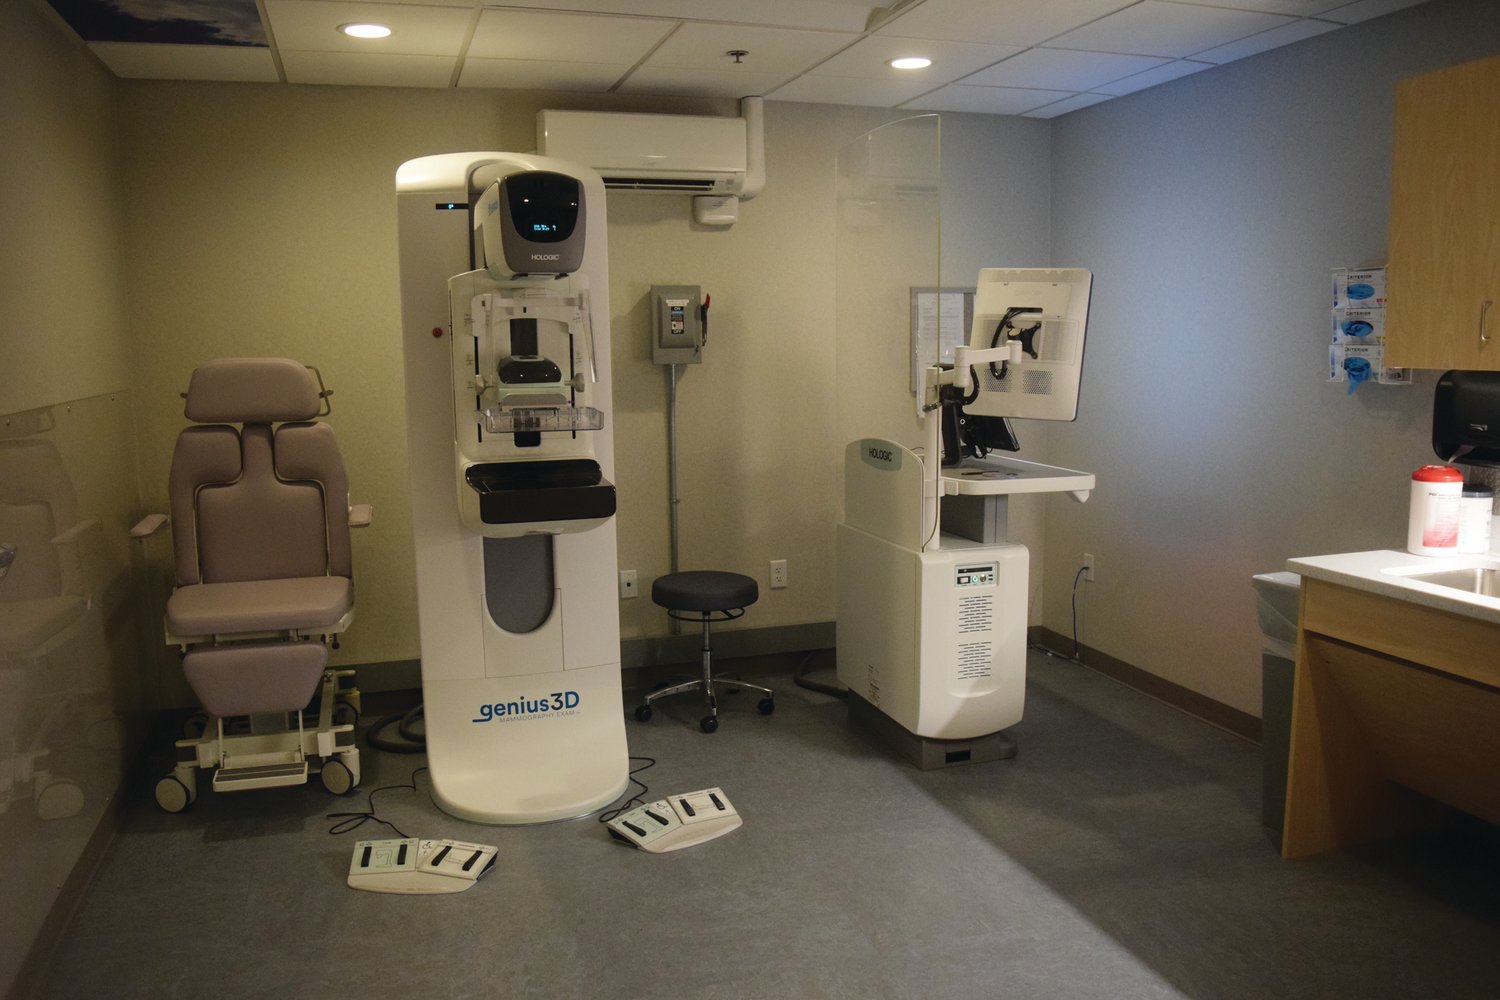 STATE OF THE ART: Sullivan gave Beacon Communications a tour of the new wing, which features some of the best breast imaging equipment available.